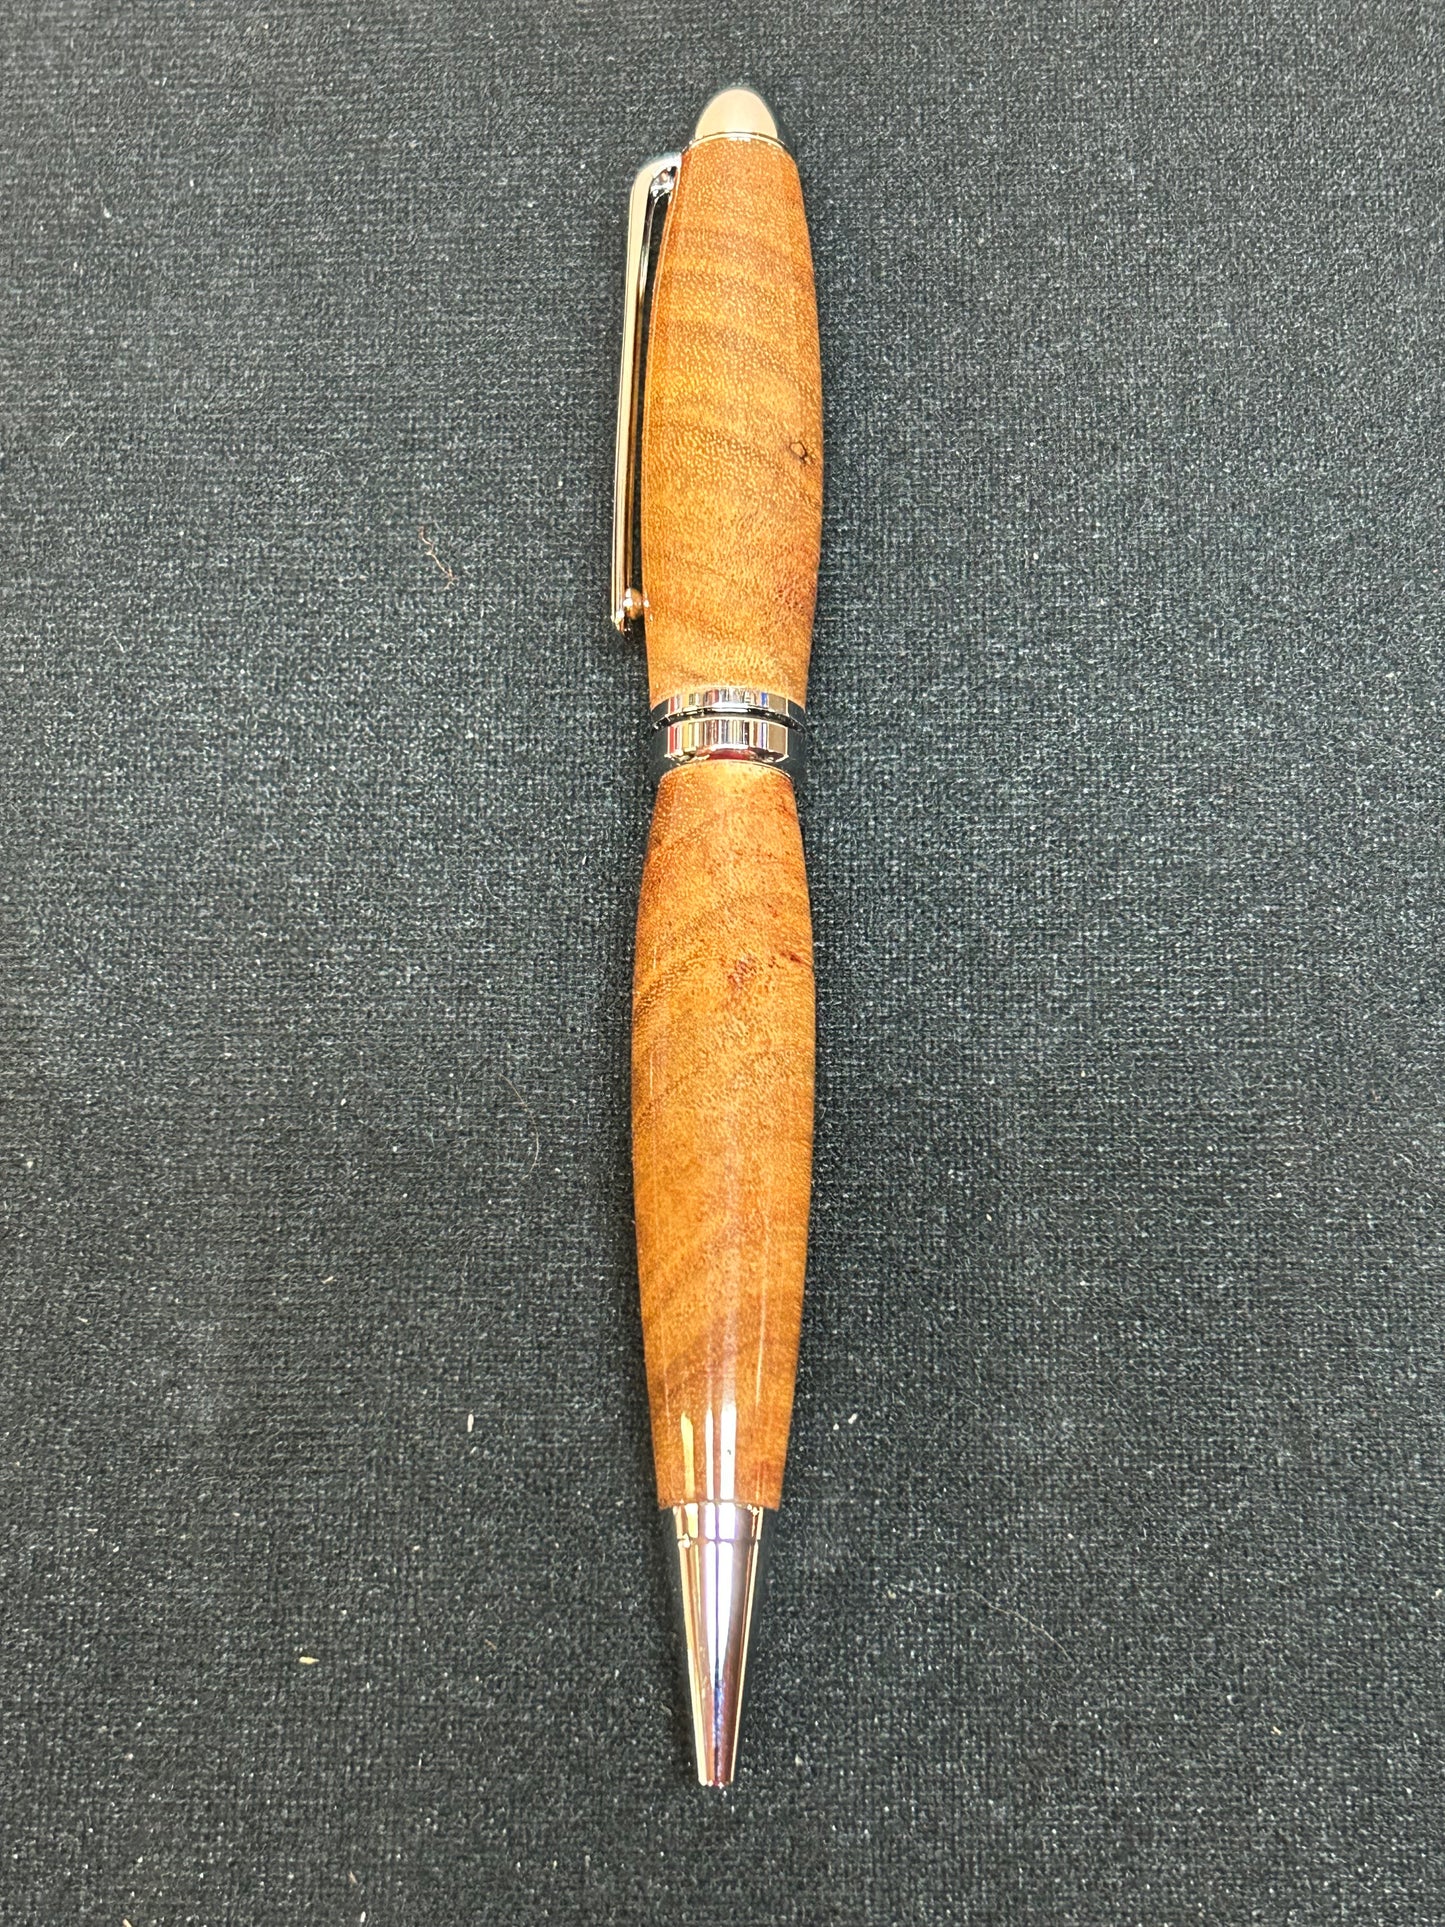 Designer Twist Pen with Canary Wood and Chrome Finish